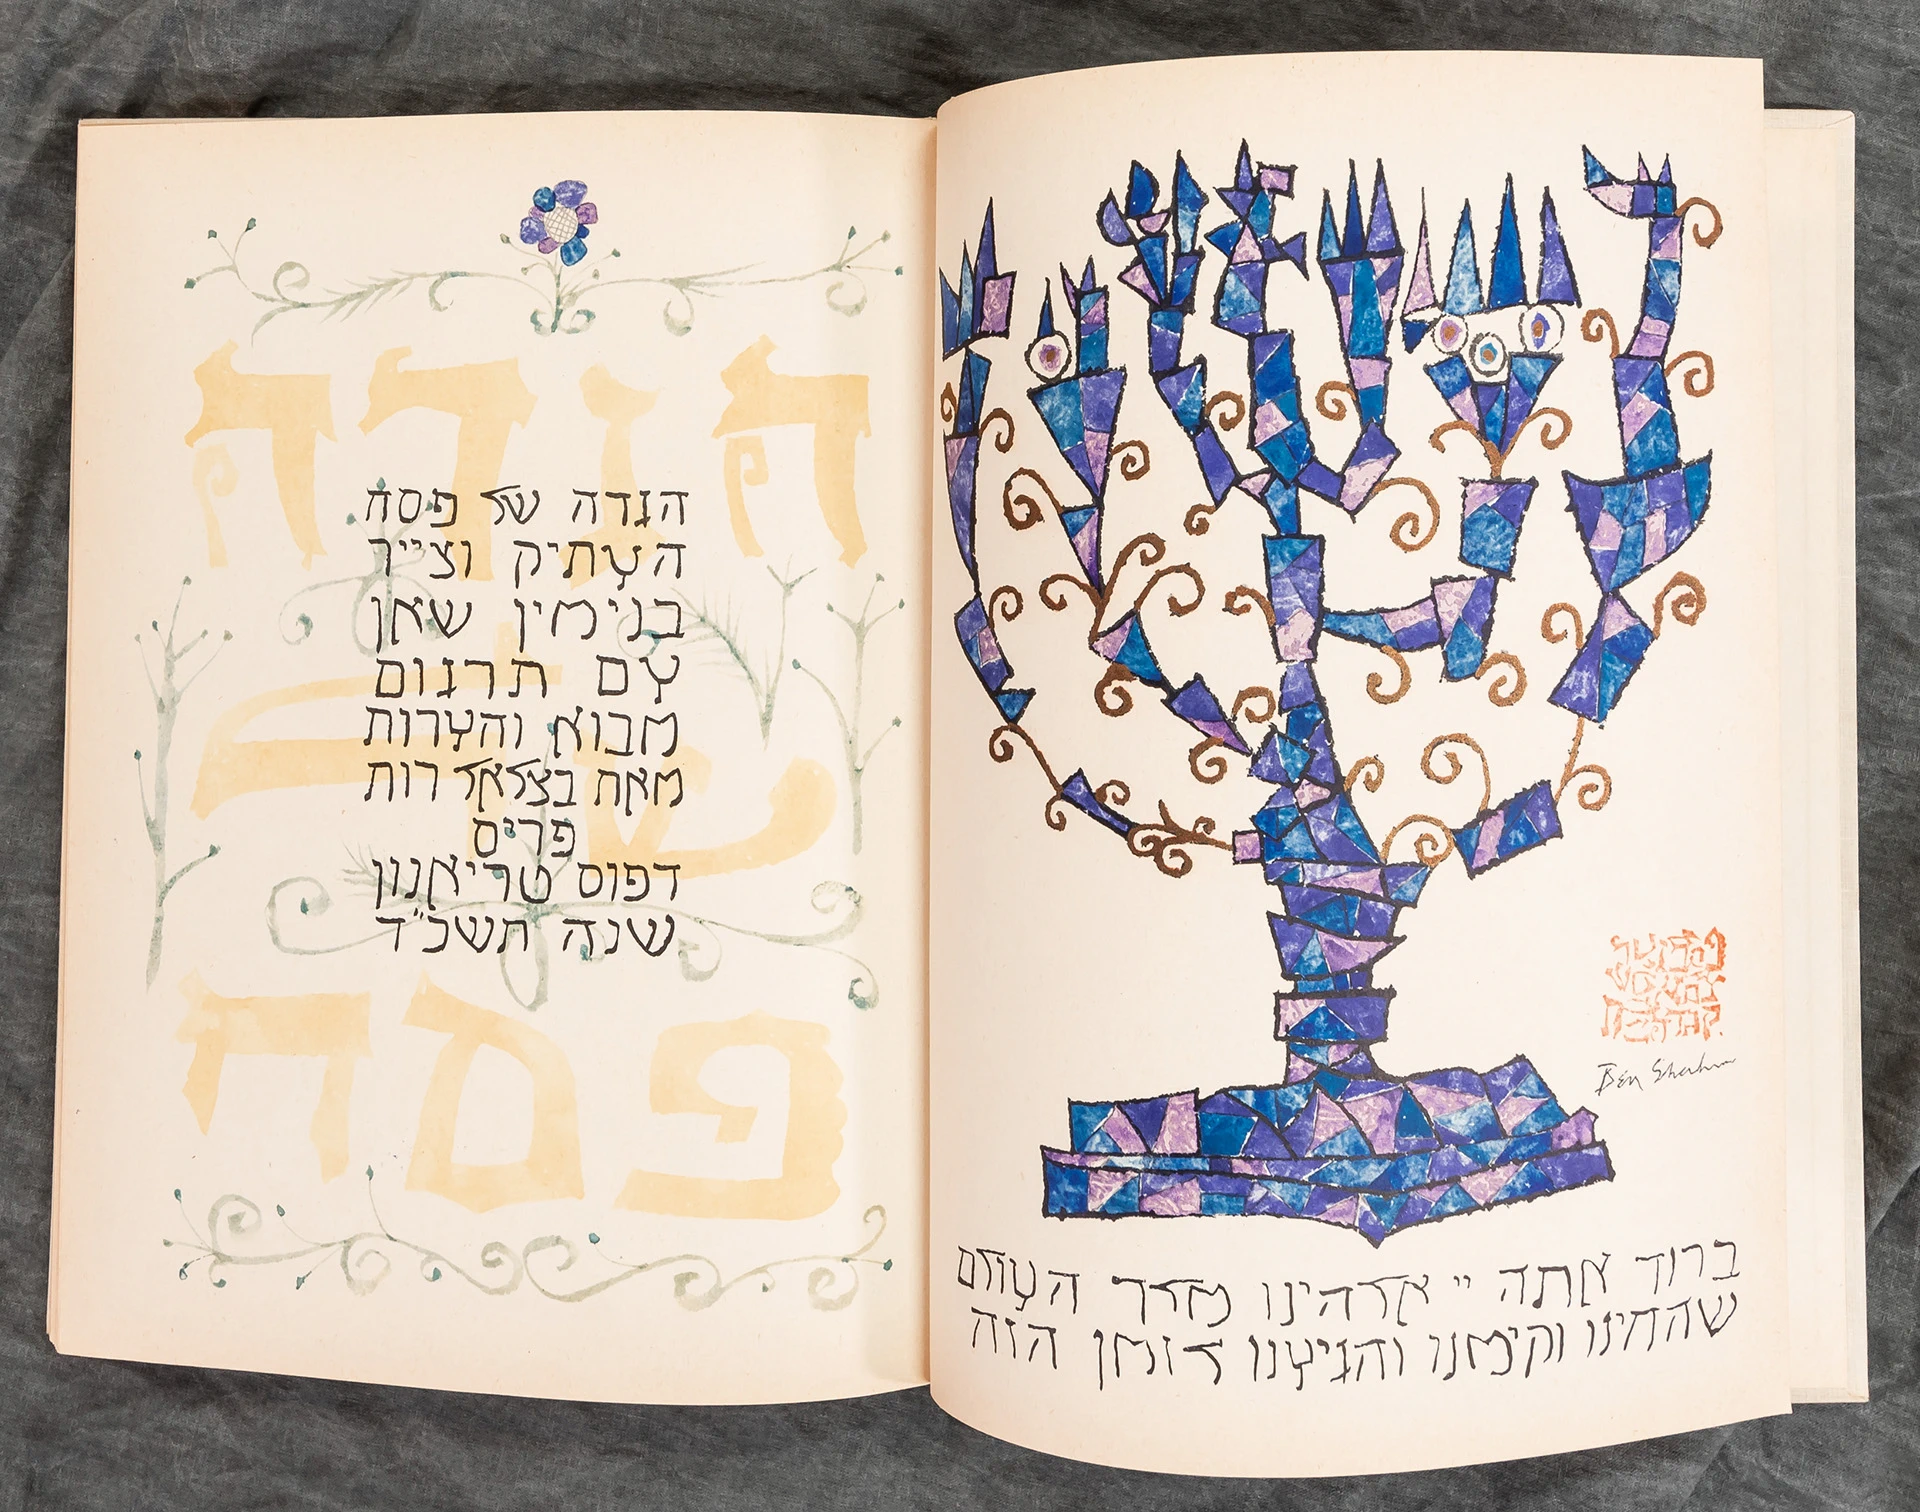 Haggadah book open to a page with text and a menorah candle drawing